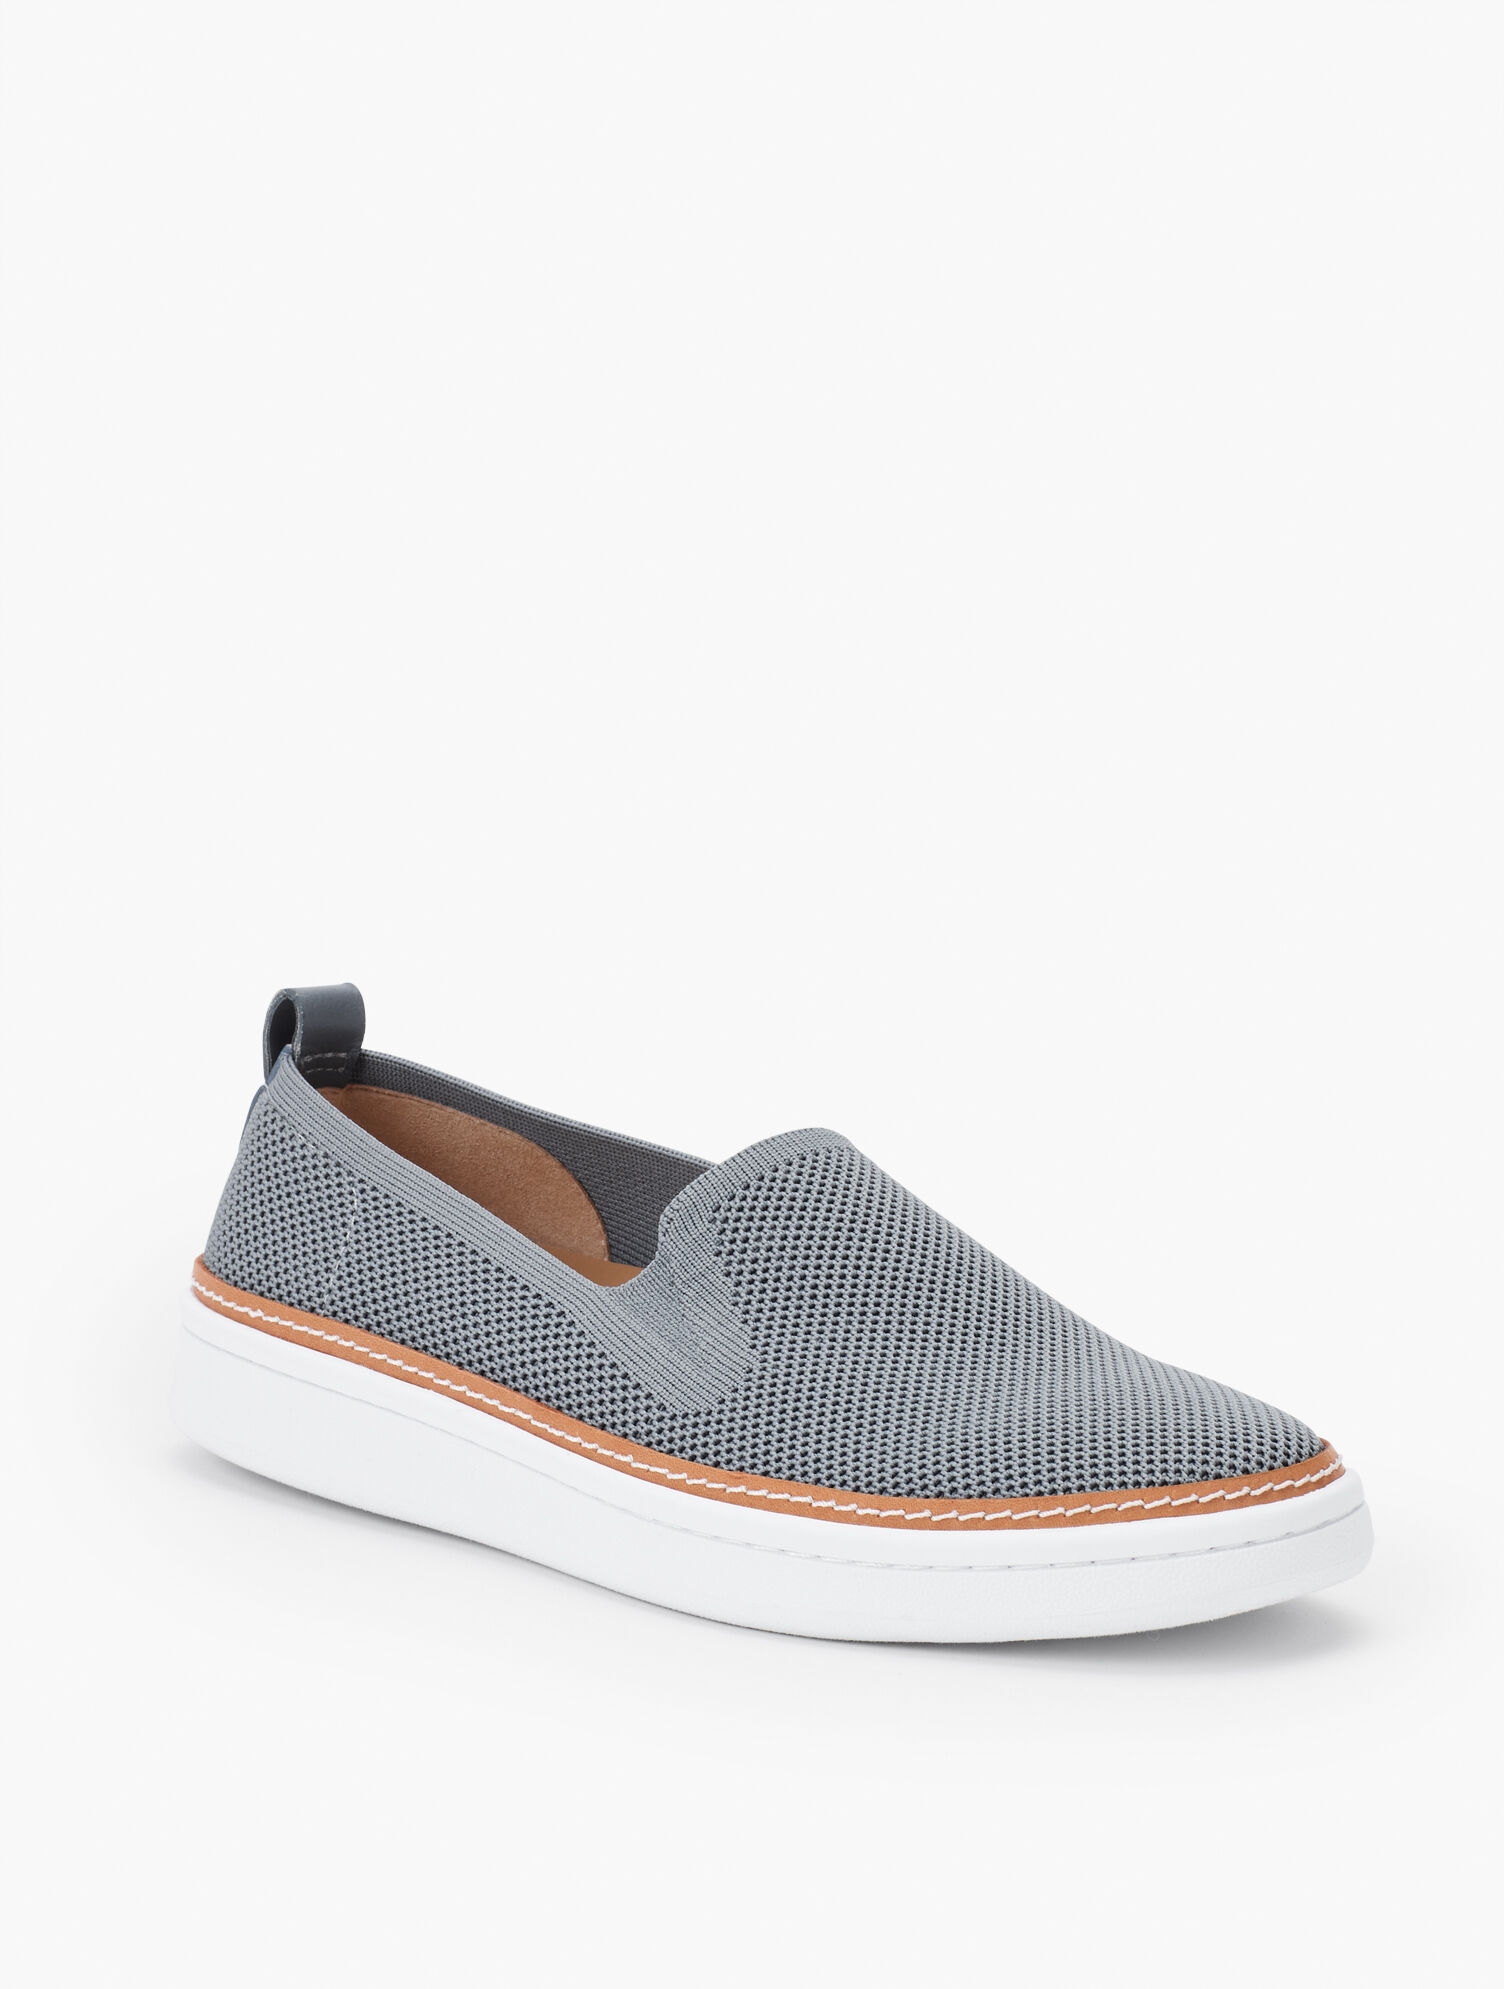 Brittany Knit Slip-On Sneakers